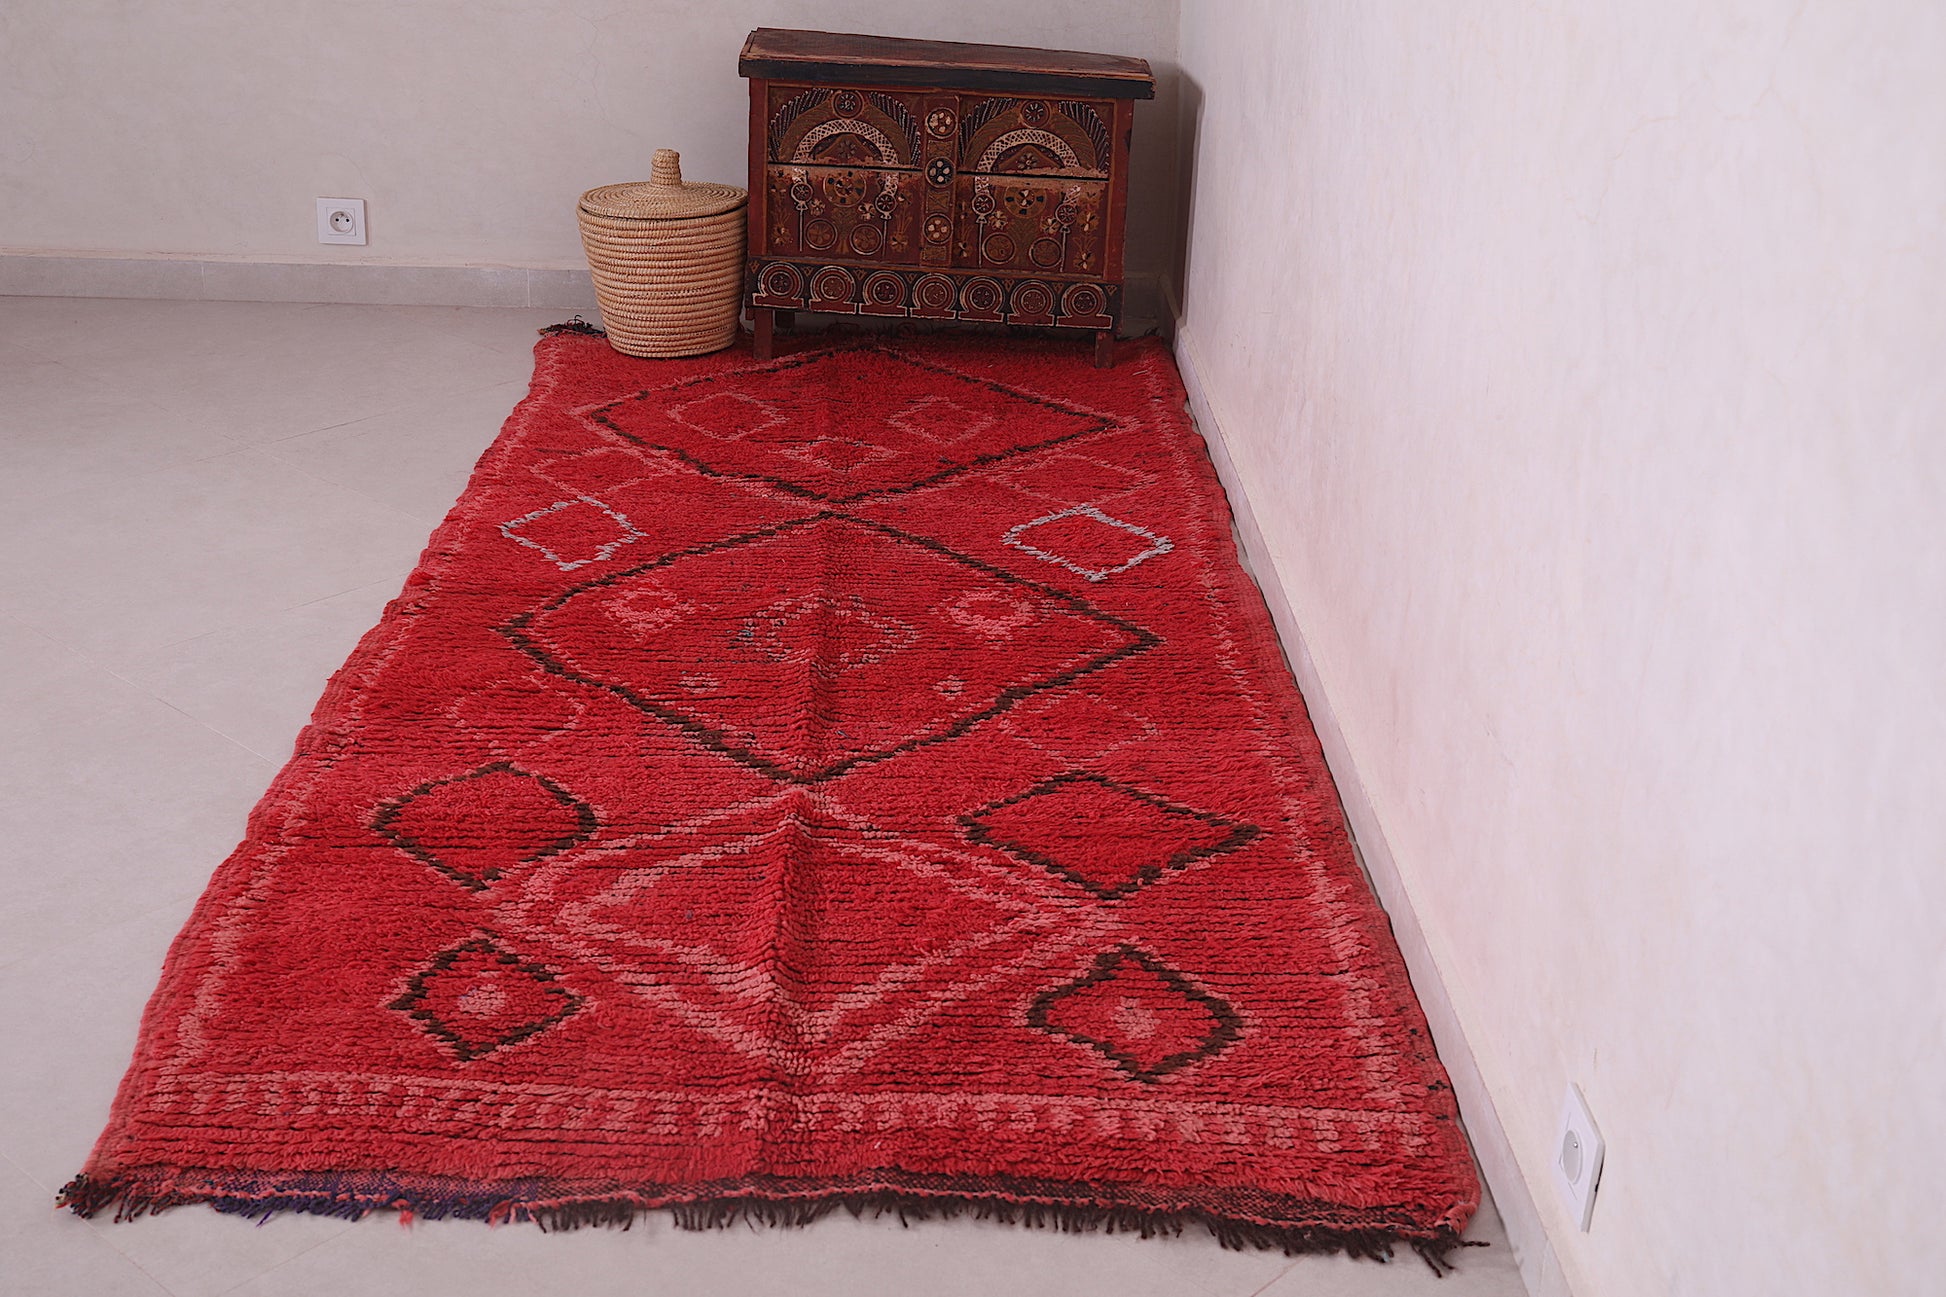 Vintage red moroccan rug 3.8 X 8.5 Feet